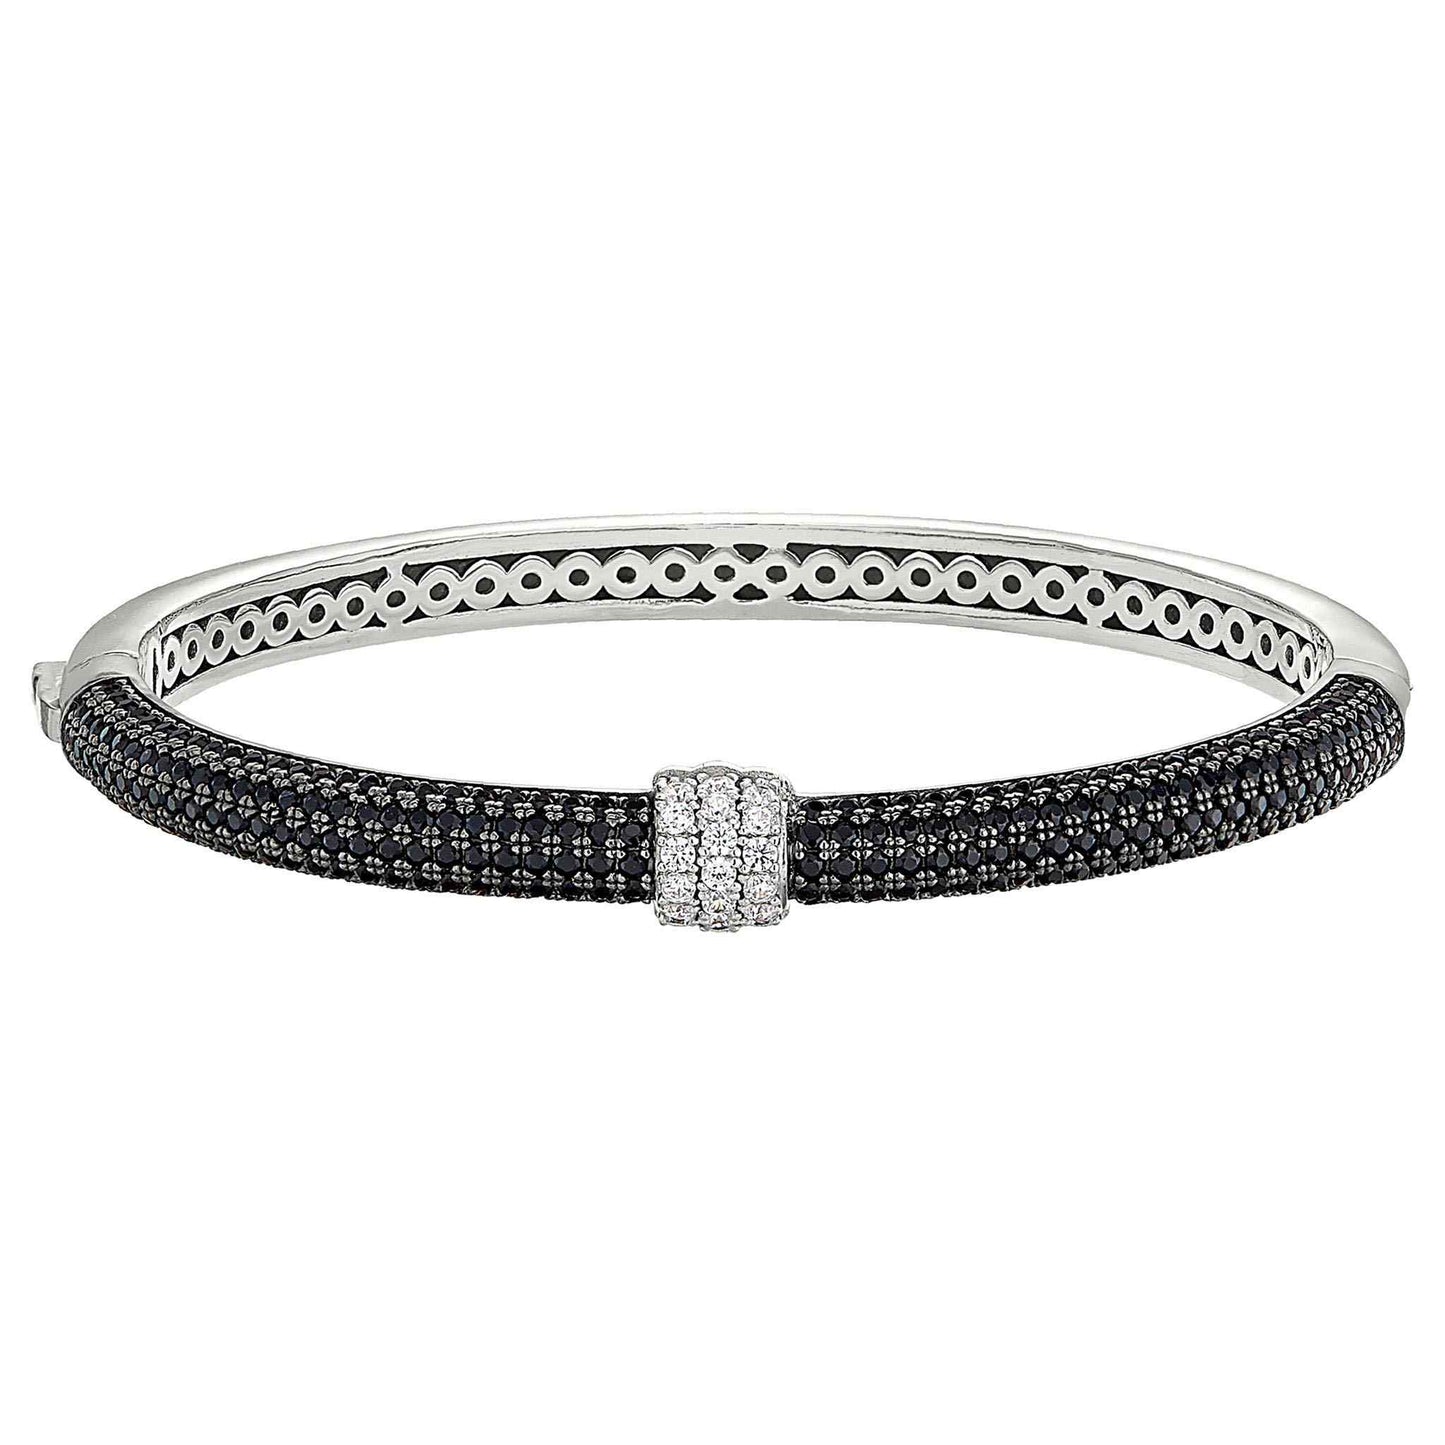 A bangle bracelet with black & white simulated diamonds displayed on a neutral white background.